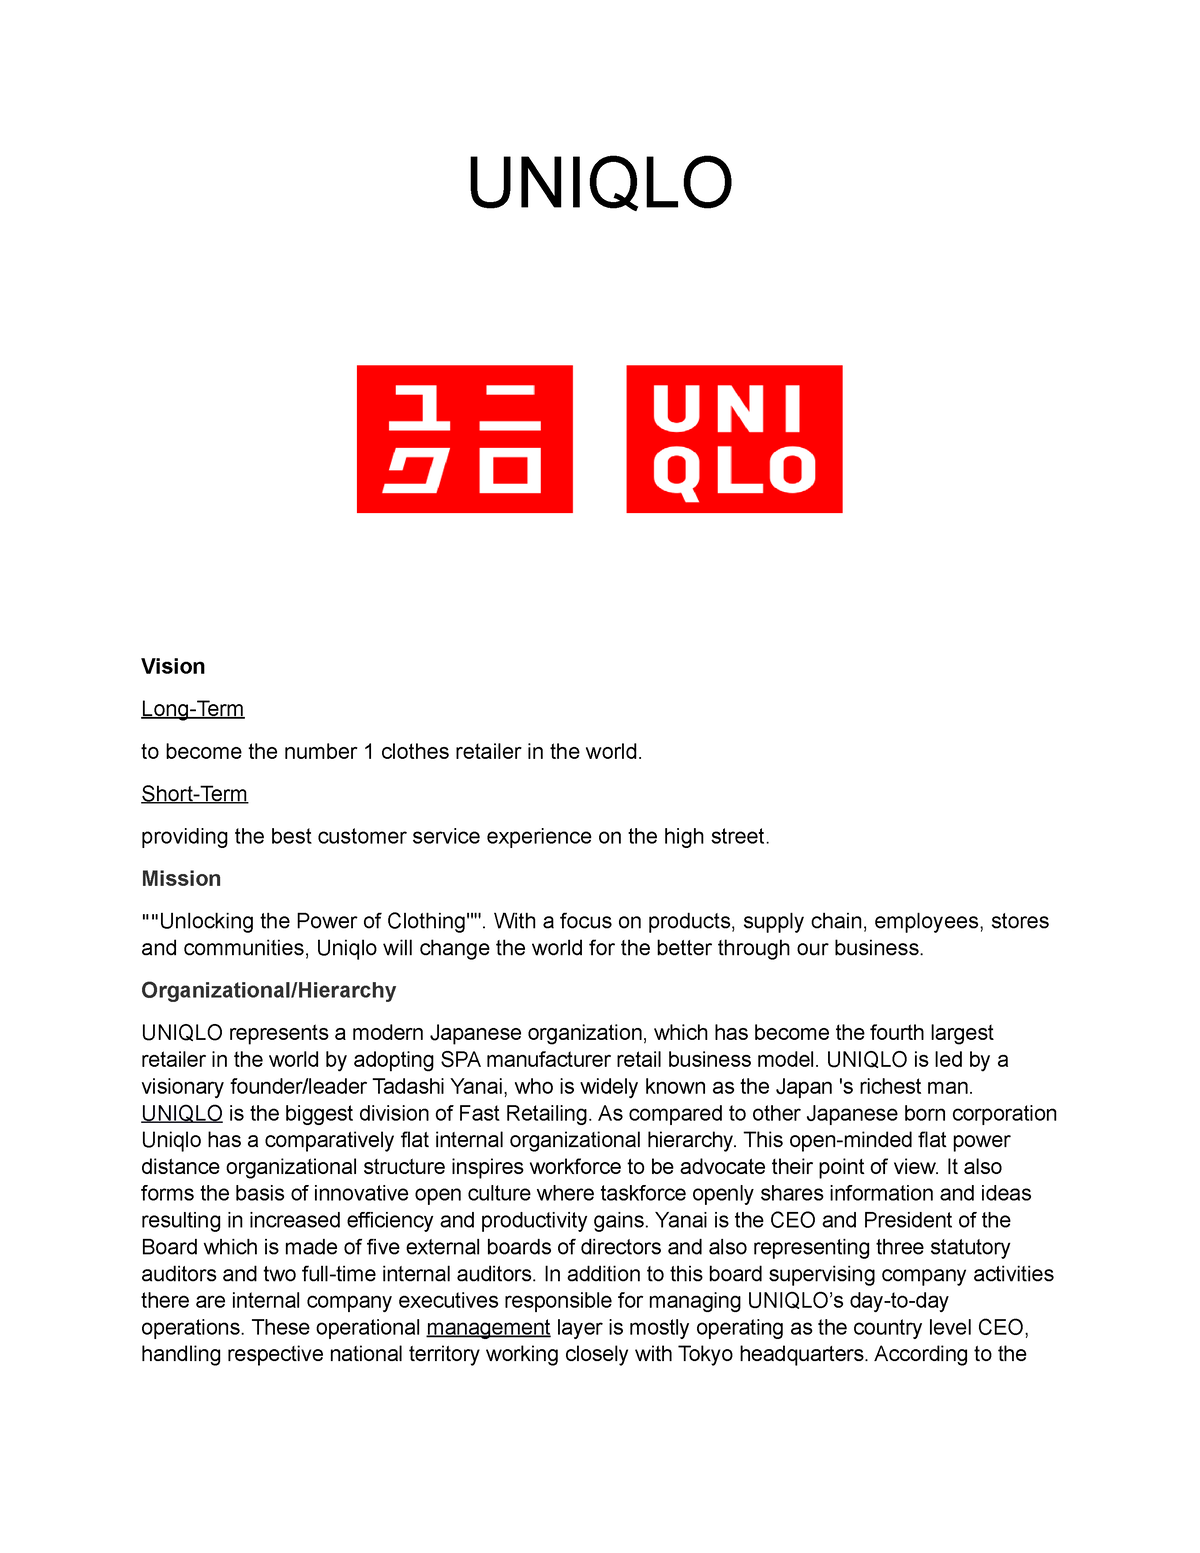 Uniqlo - assignment duo - UNIQLO Vision Long-Term to become the number ...